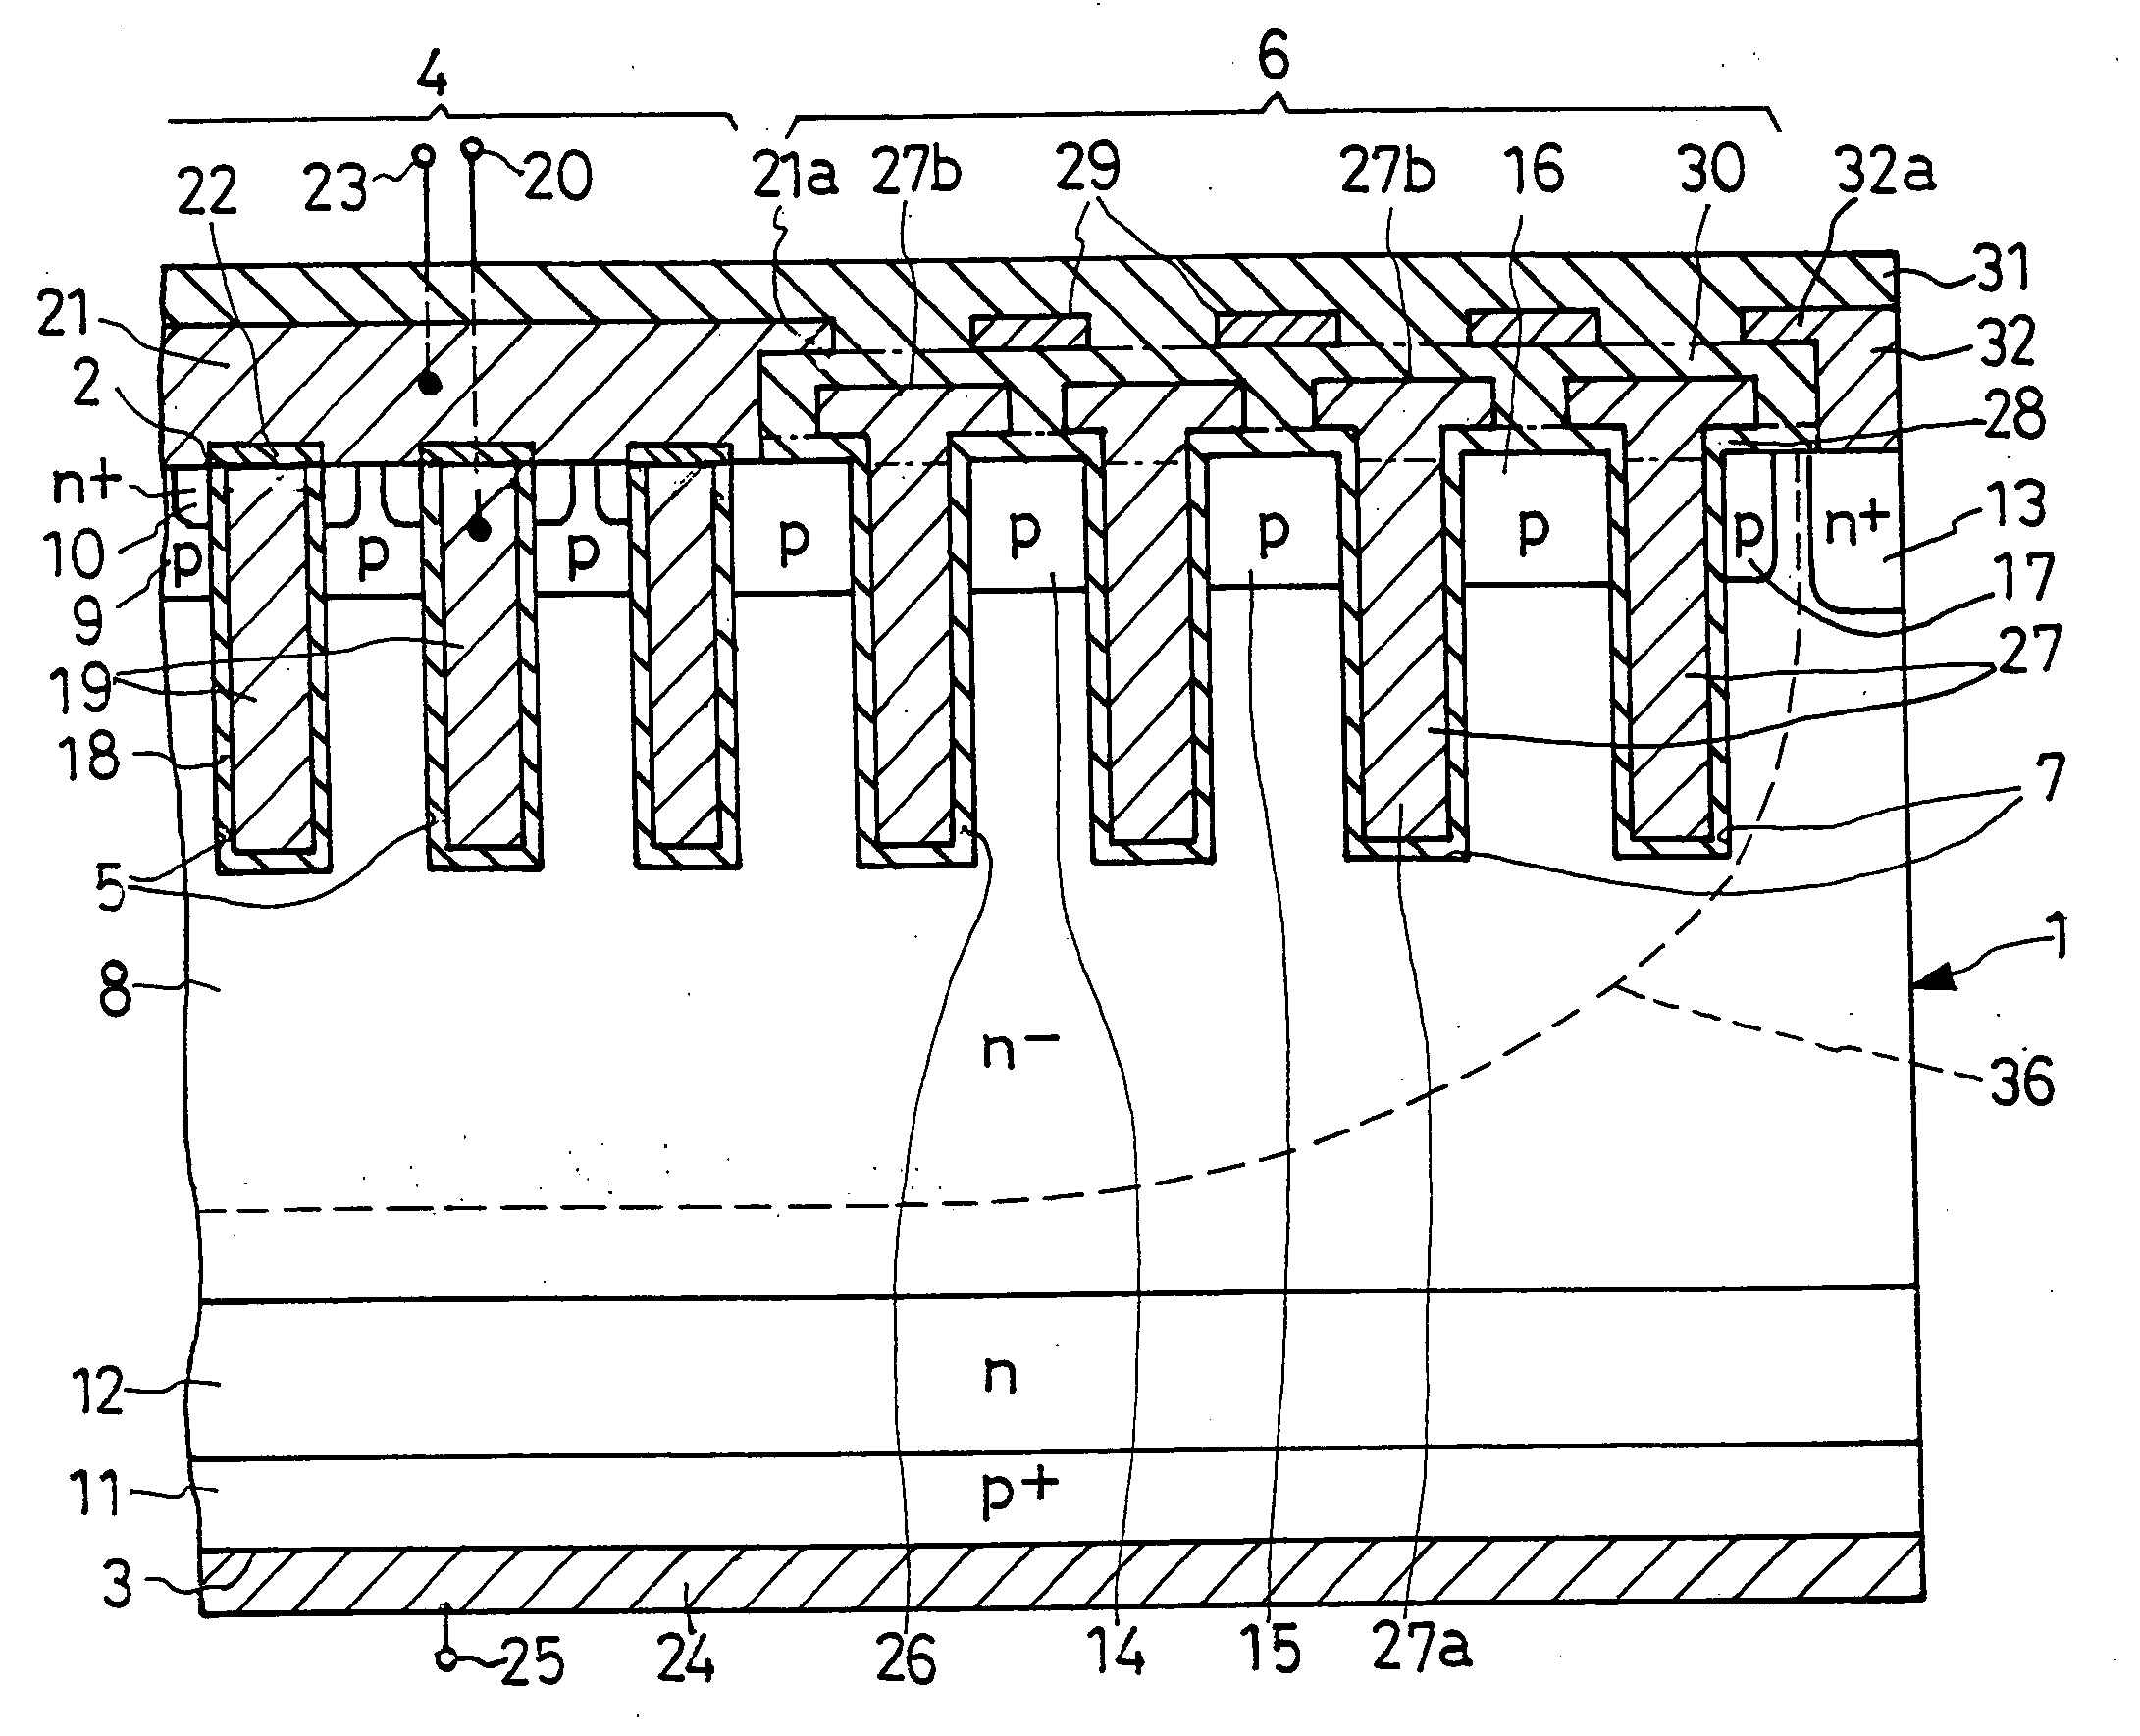 Trench semiconductor device of improved voltage strength, and method of fabrication